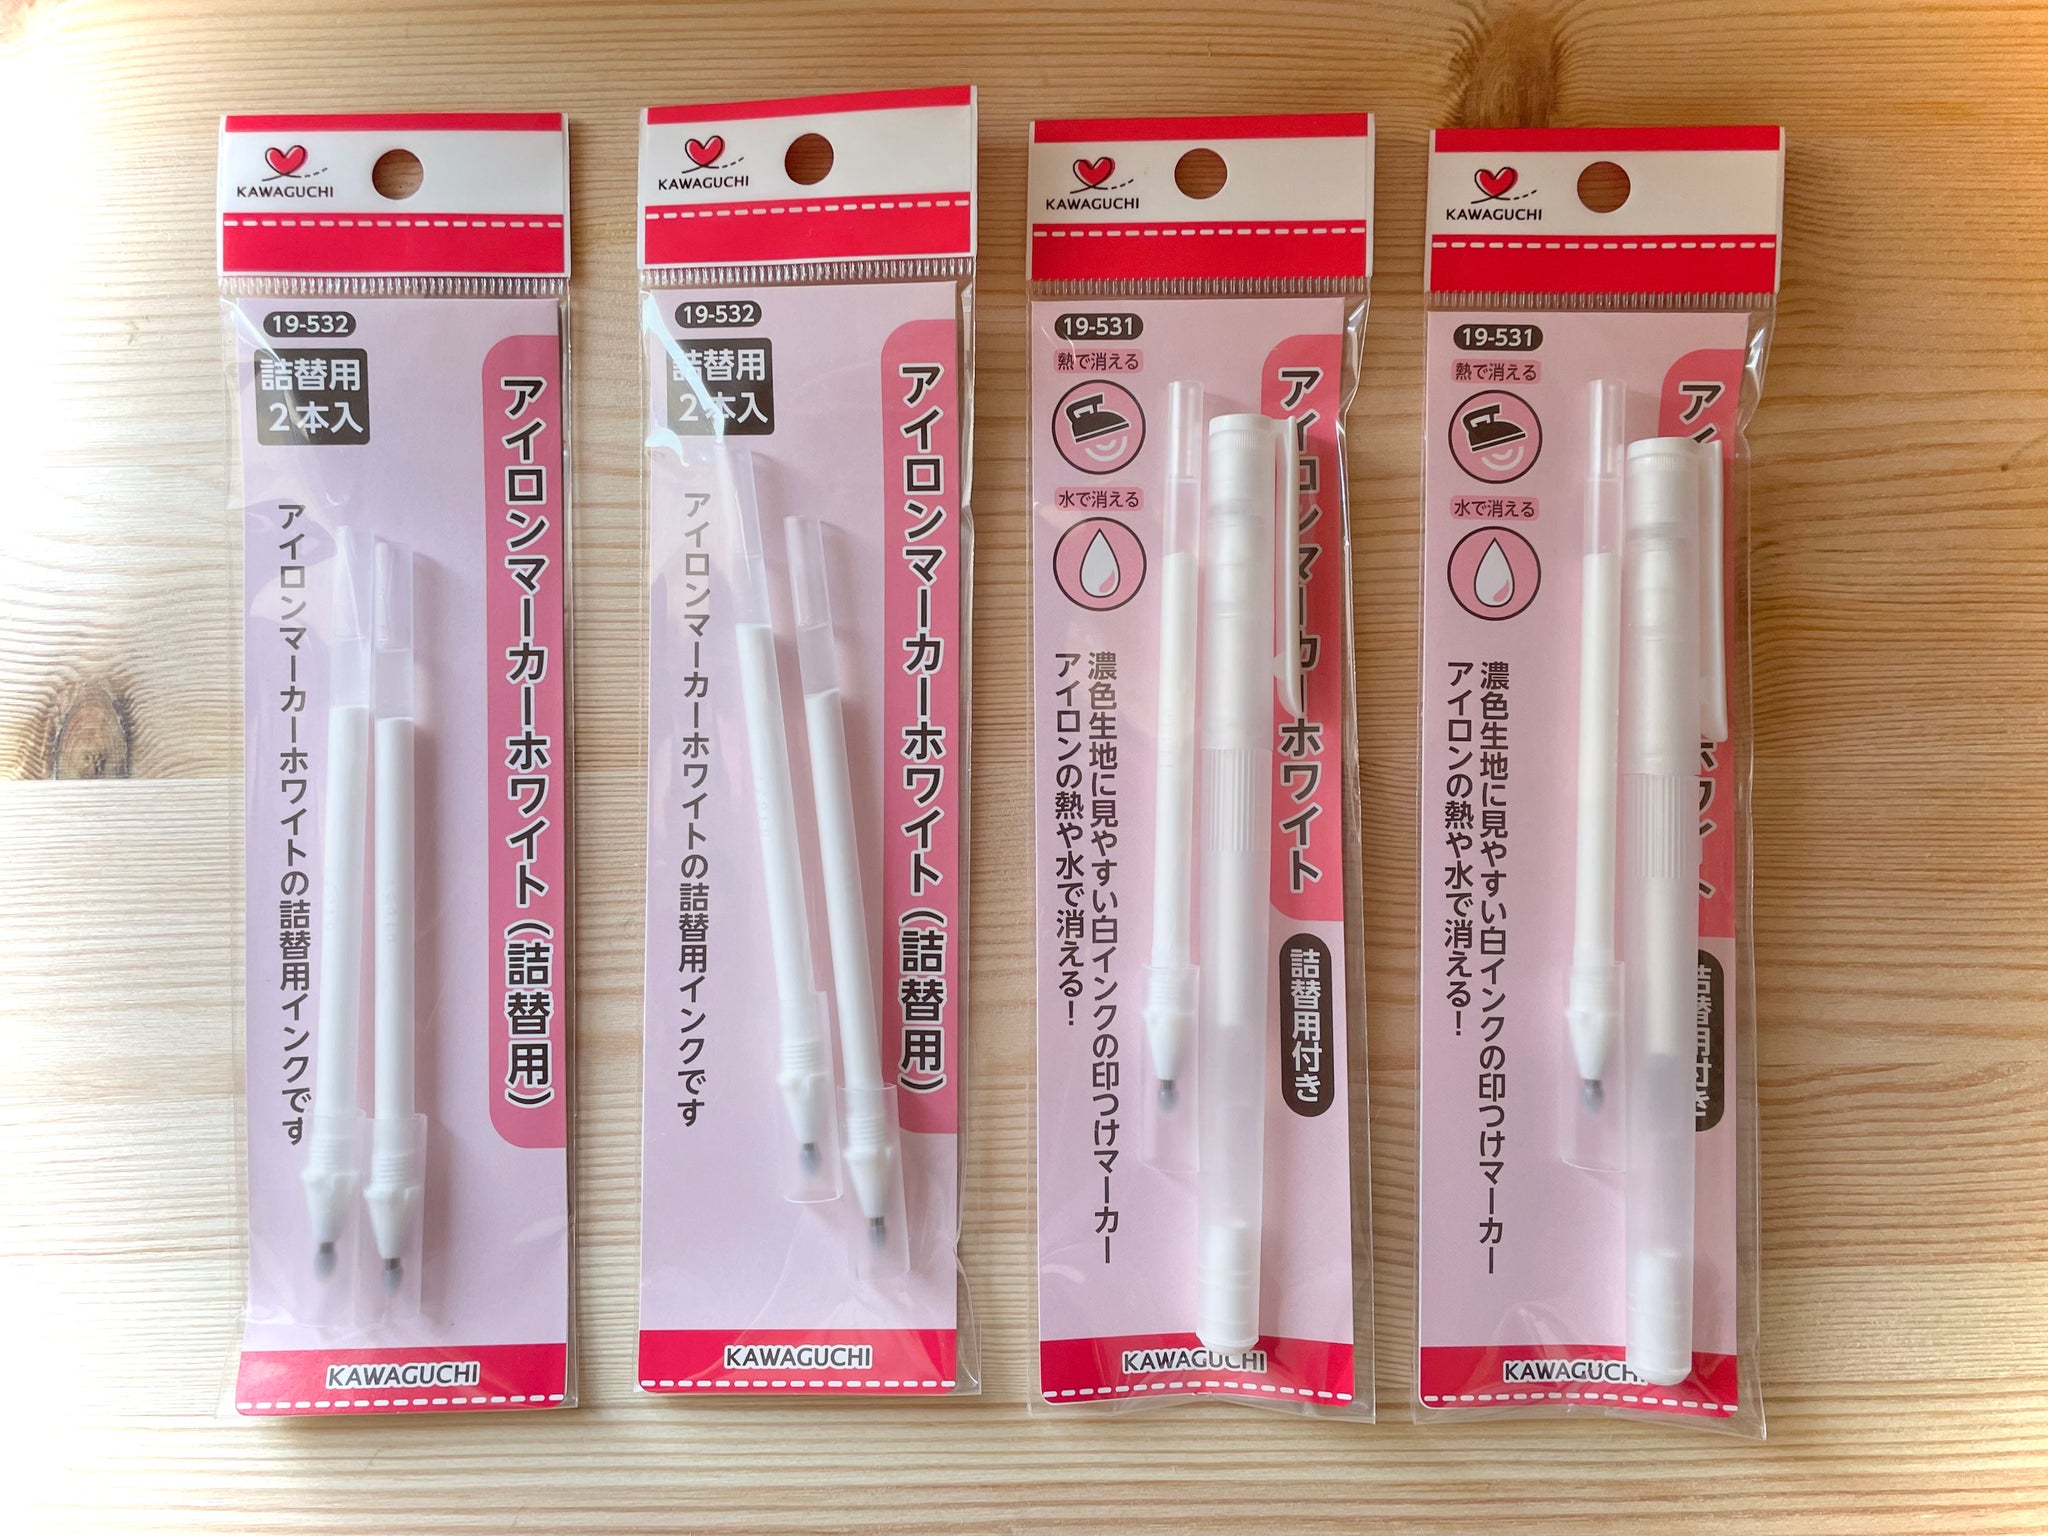 Which fabric marker should I use for drawing Sashiko patterns